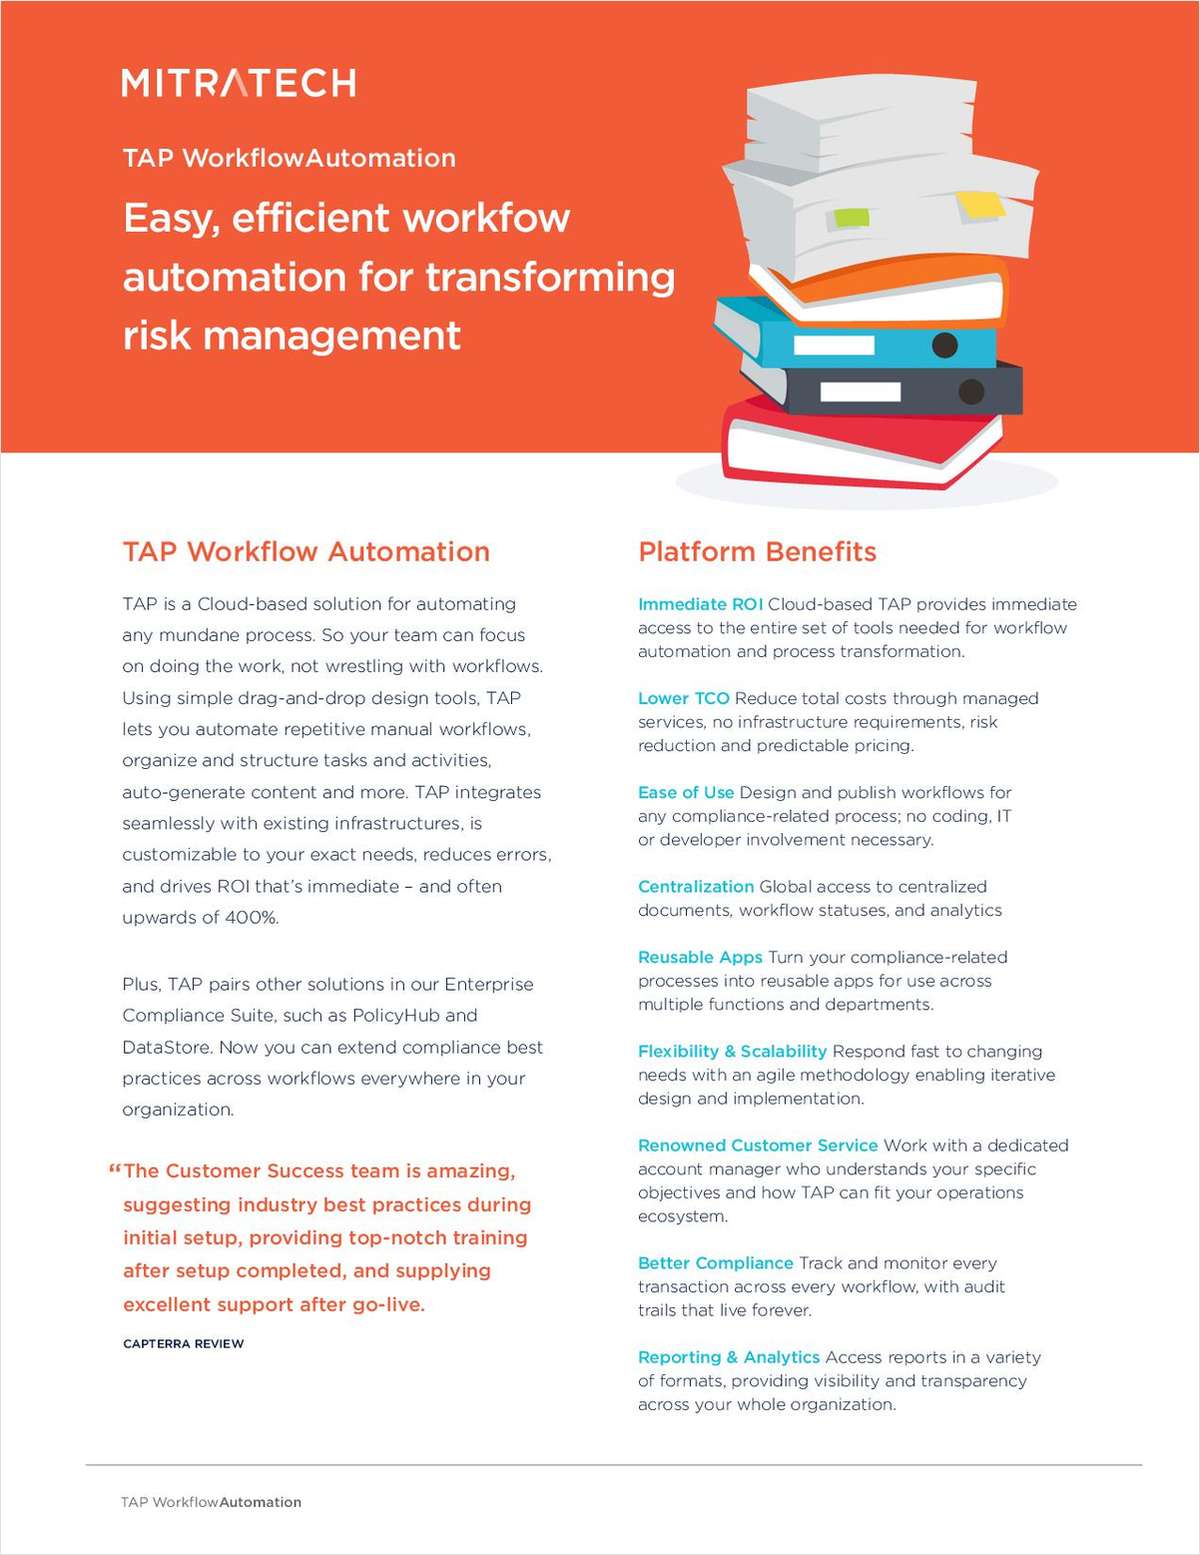 TAP Workflow Automation for Transforming Risk Management